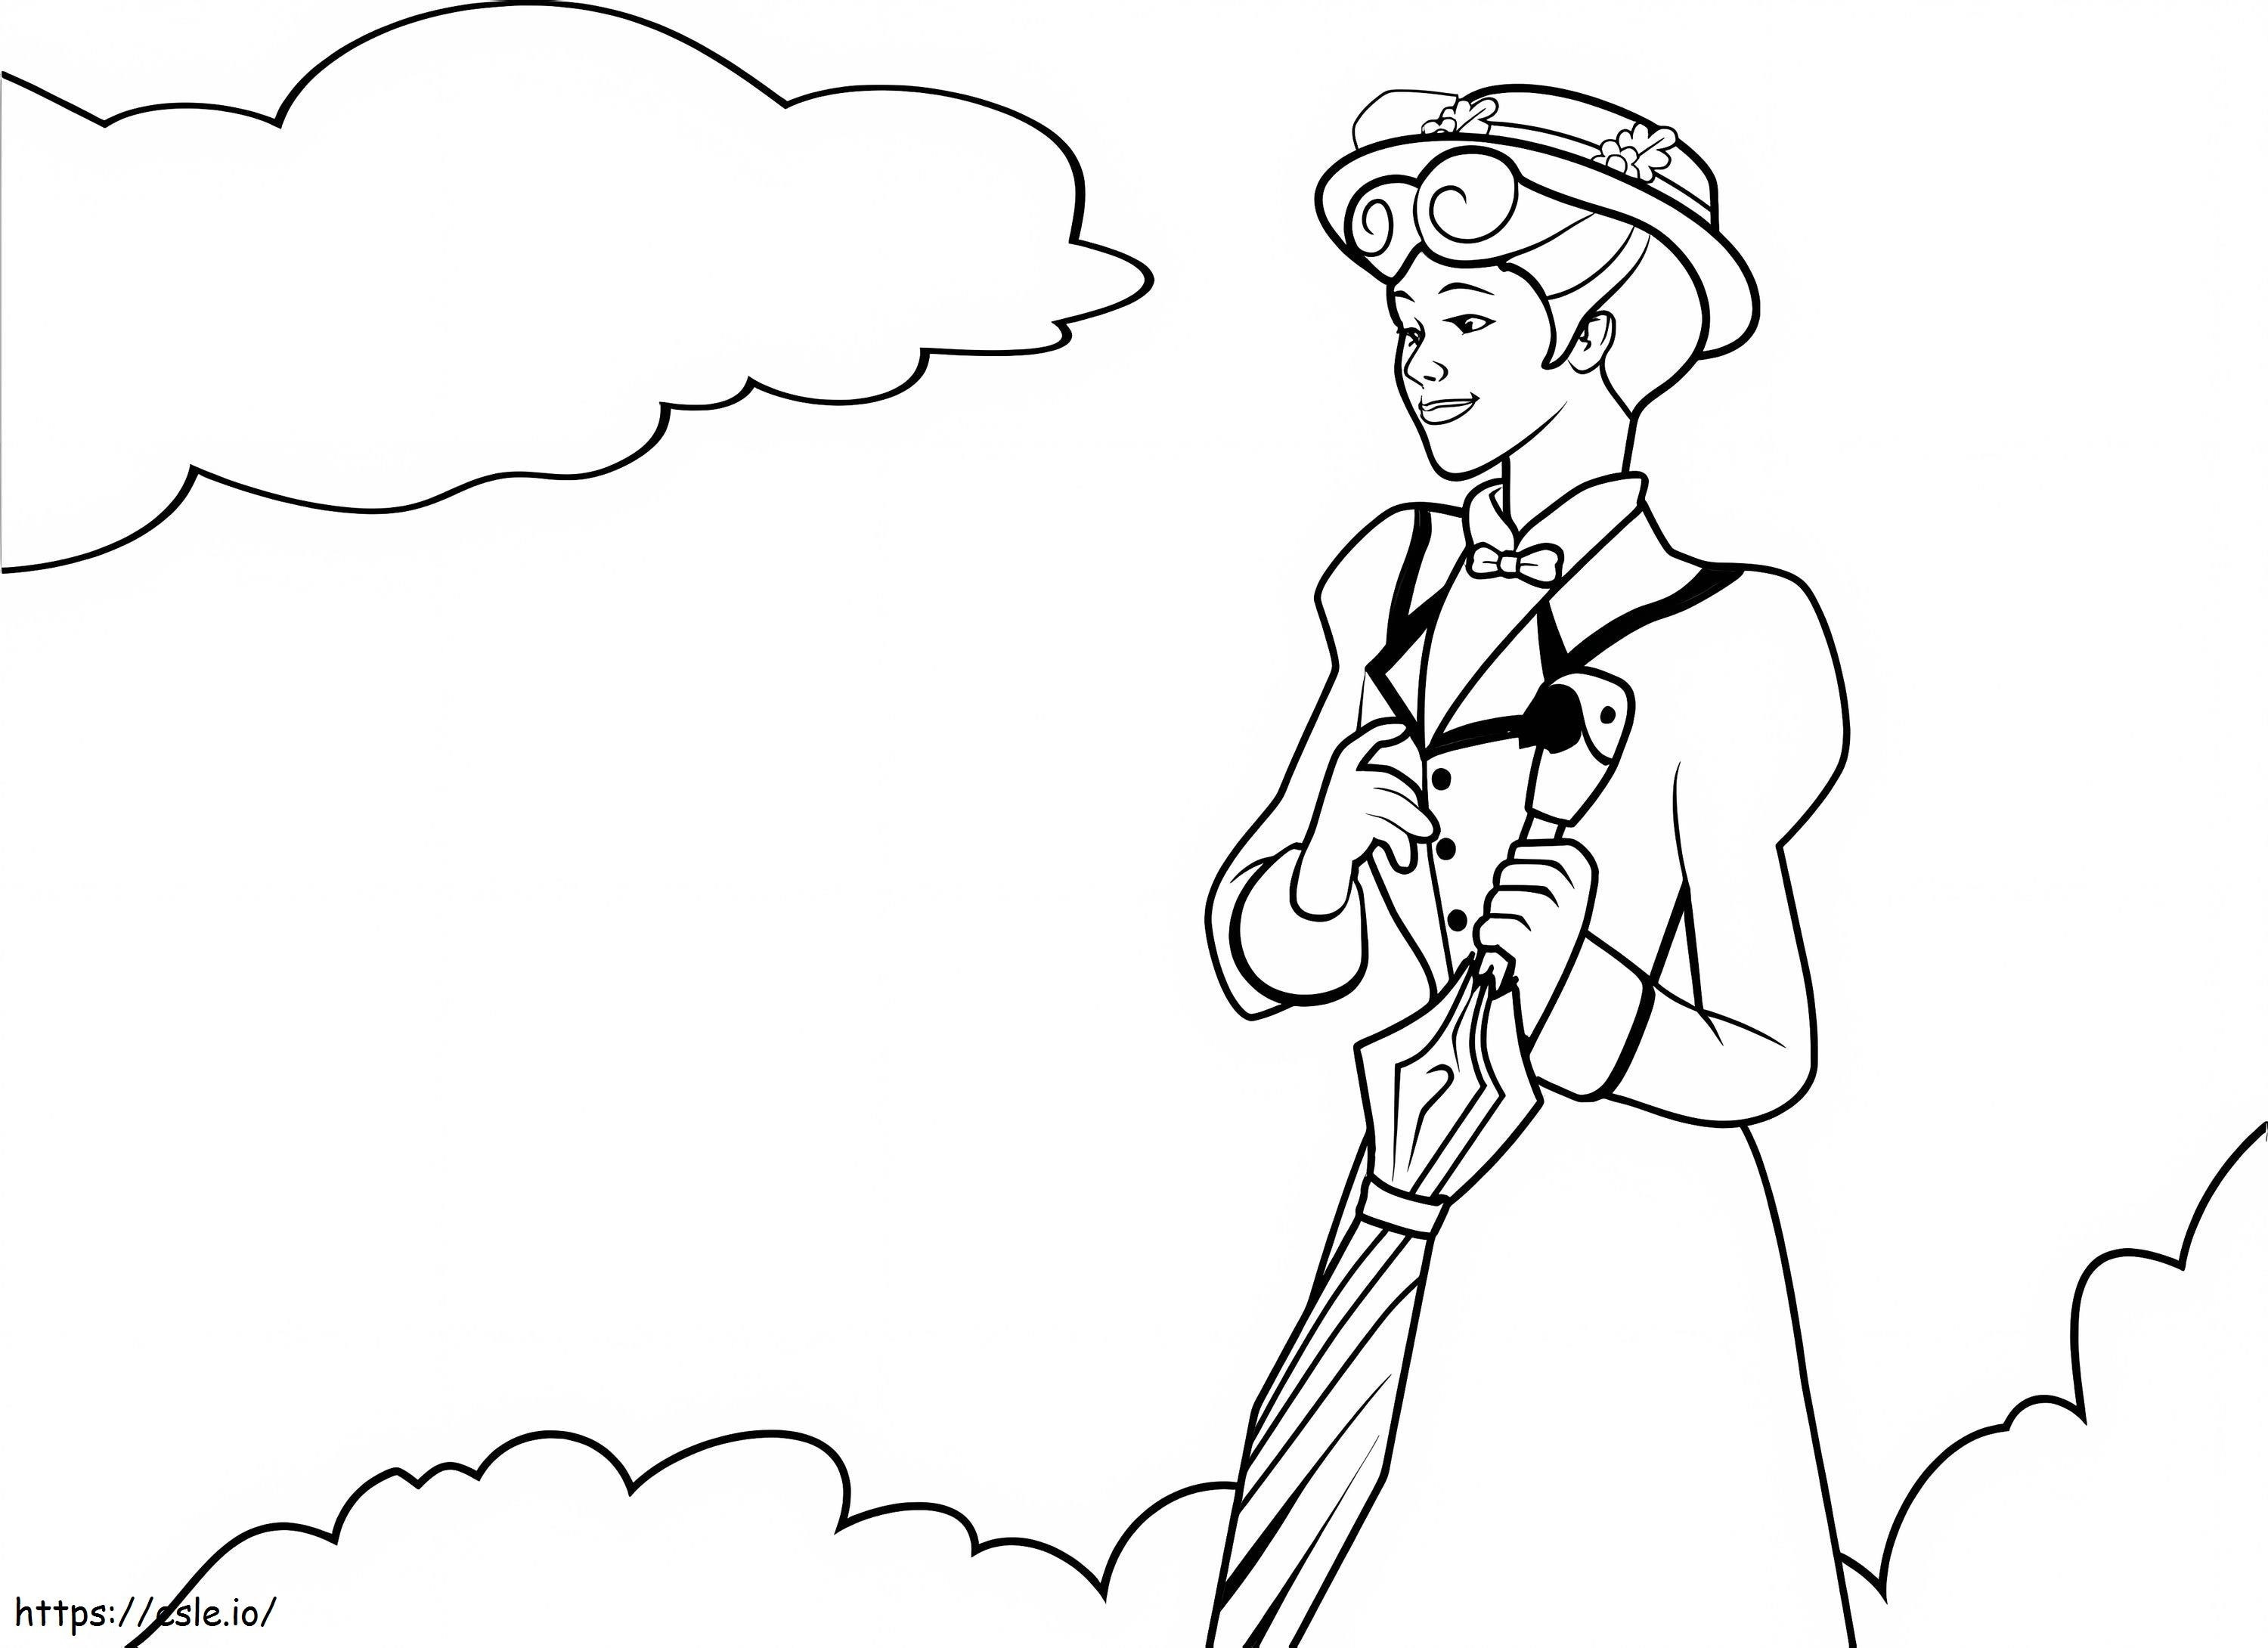 Mary Poppins 8 coloring page